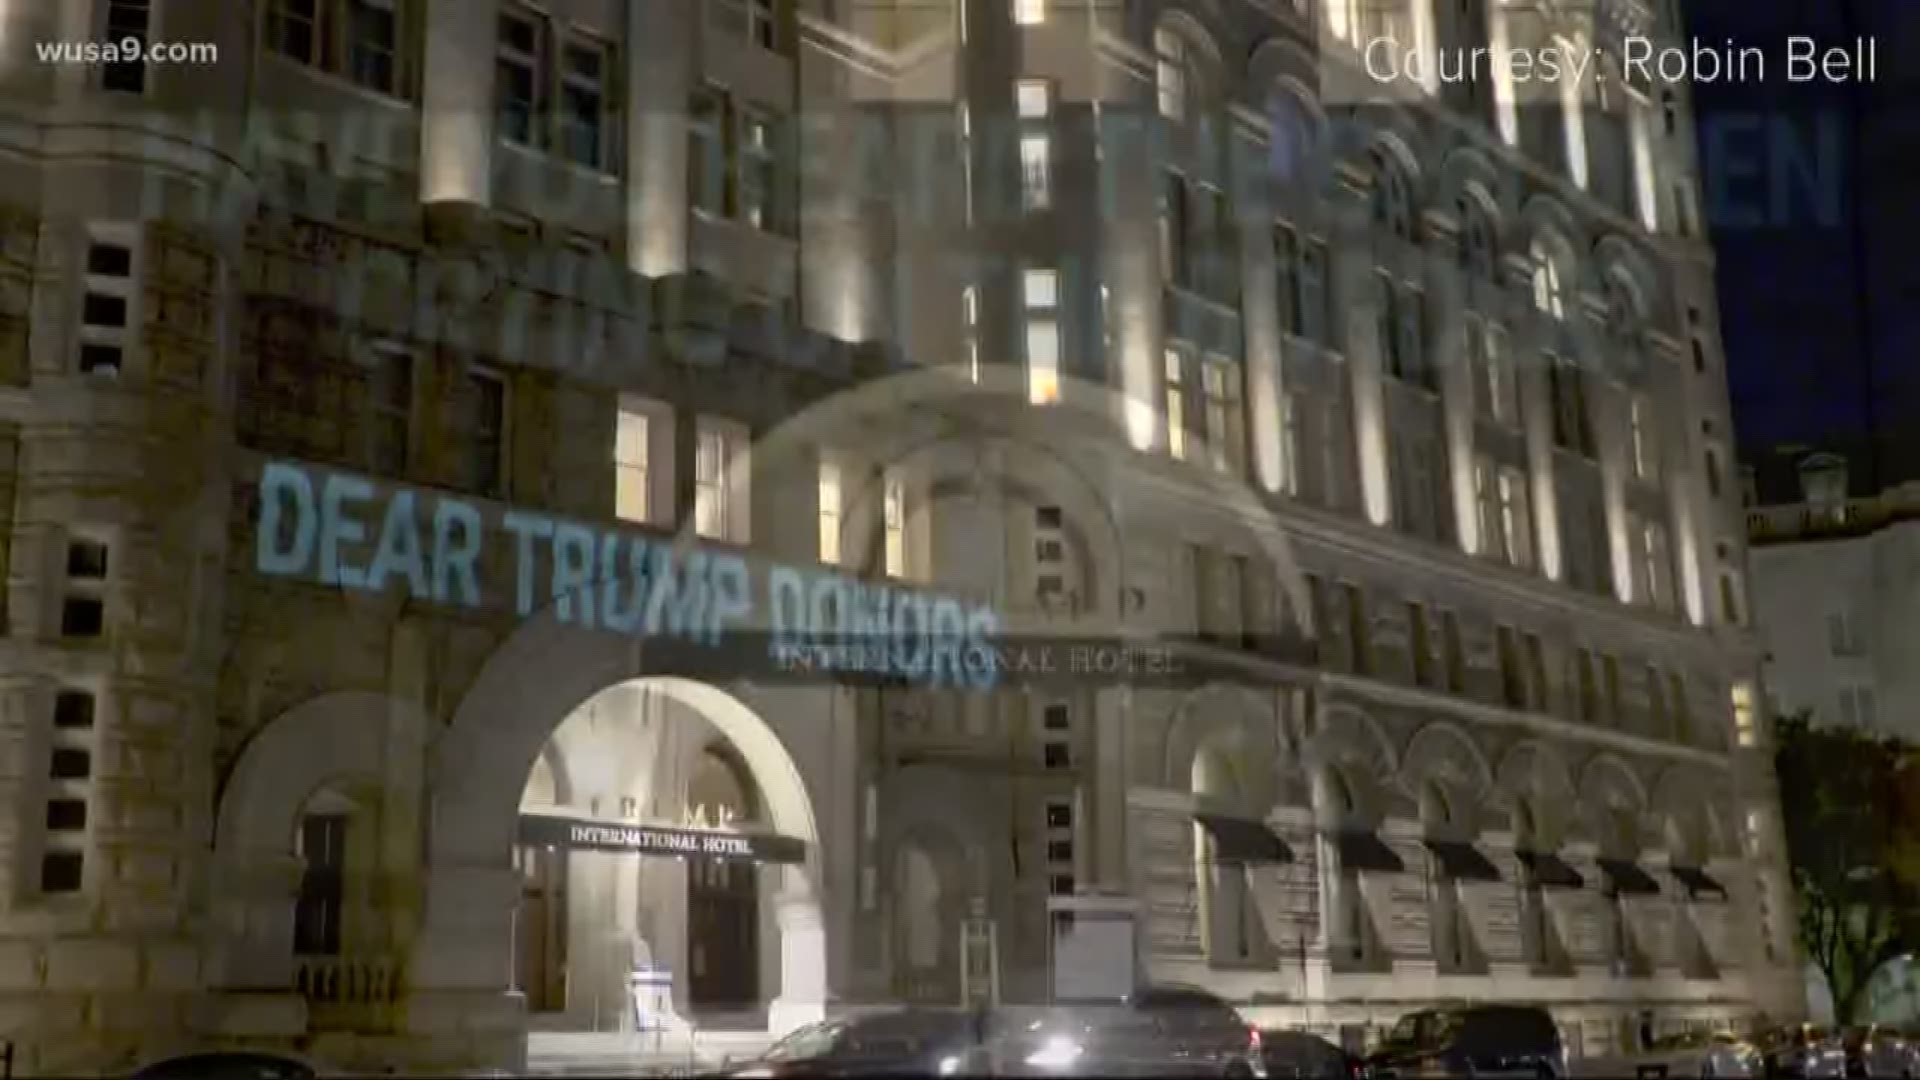 Have you seen the light projections plastered across the Trump Hotel in DC? Different phrases radiate across the entrance. Each one protesting the current administration. All of it is the work of one artist: Robin Bell.